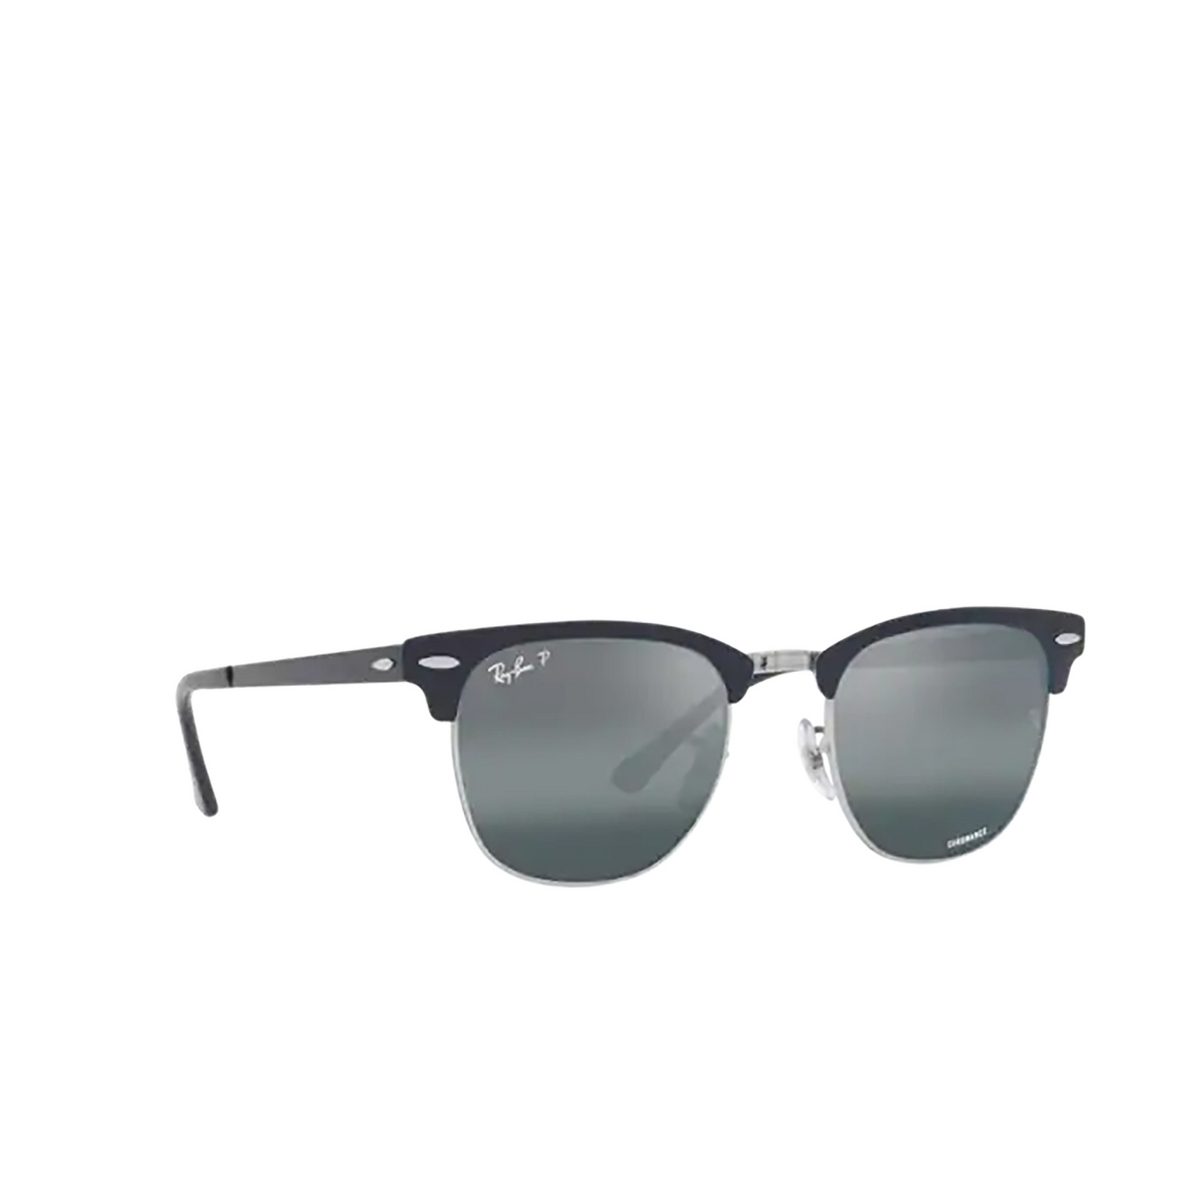 Ray-Ban CLUBMASTER METAL Sunglasses 9254G6 Silver On Blue - three-quarters view